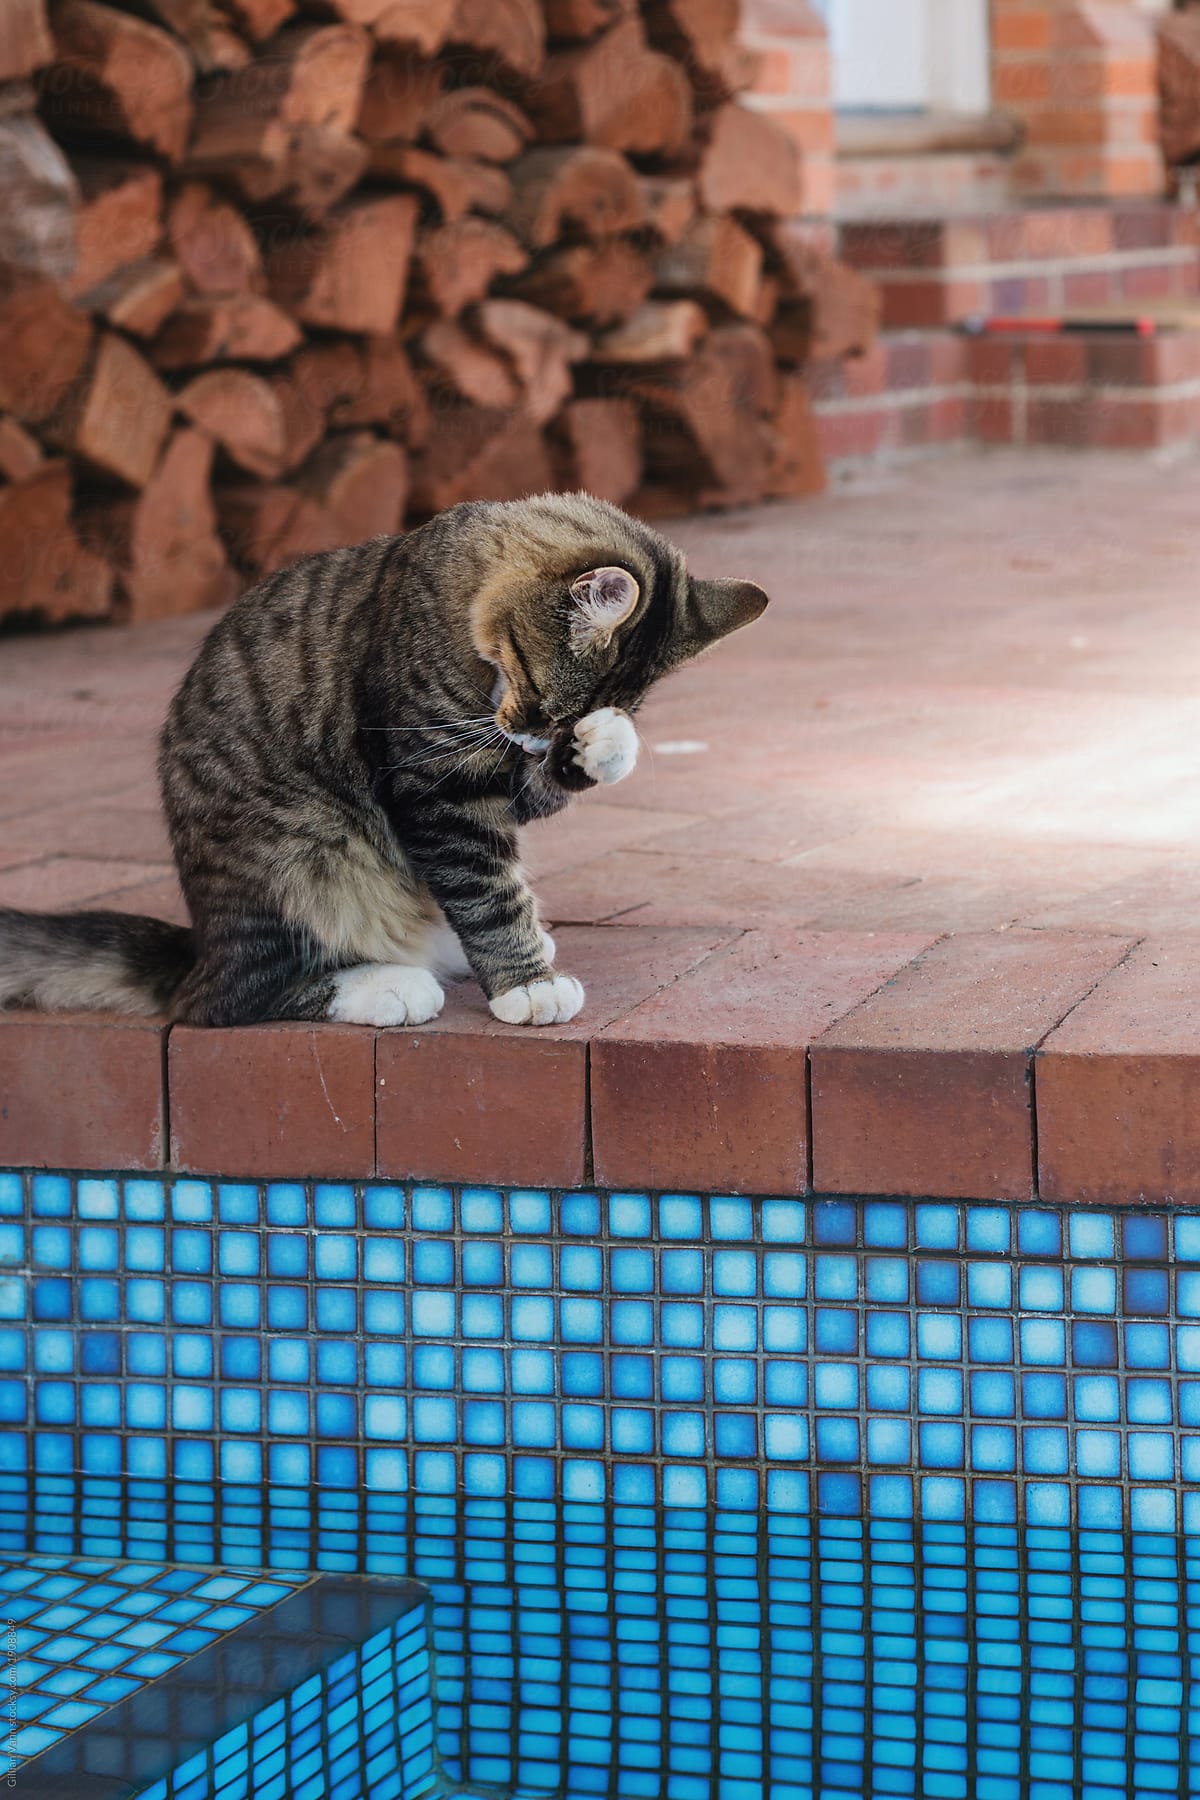 fun wtf moment with cat sitting by swimming pool